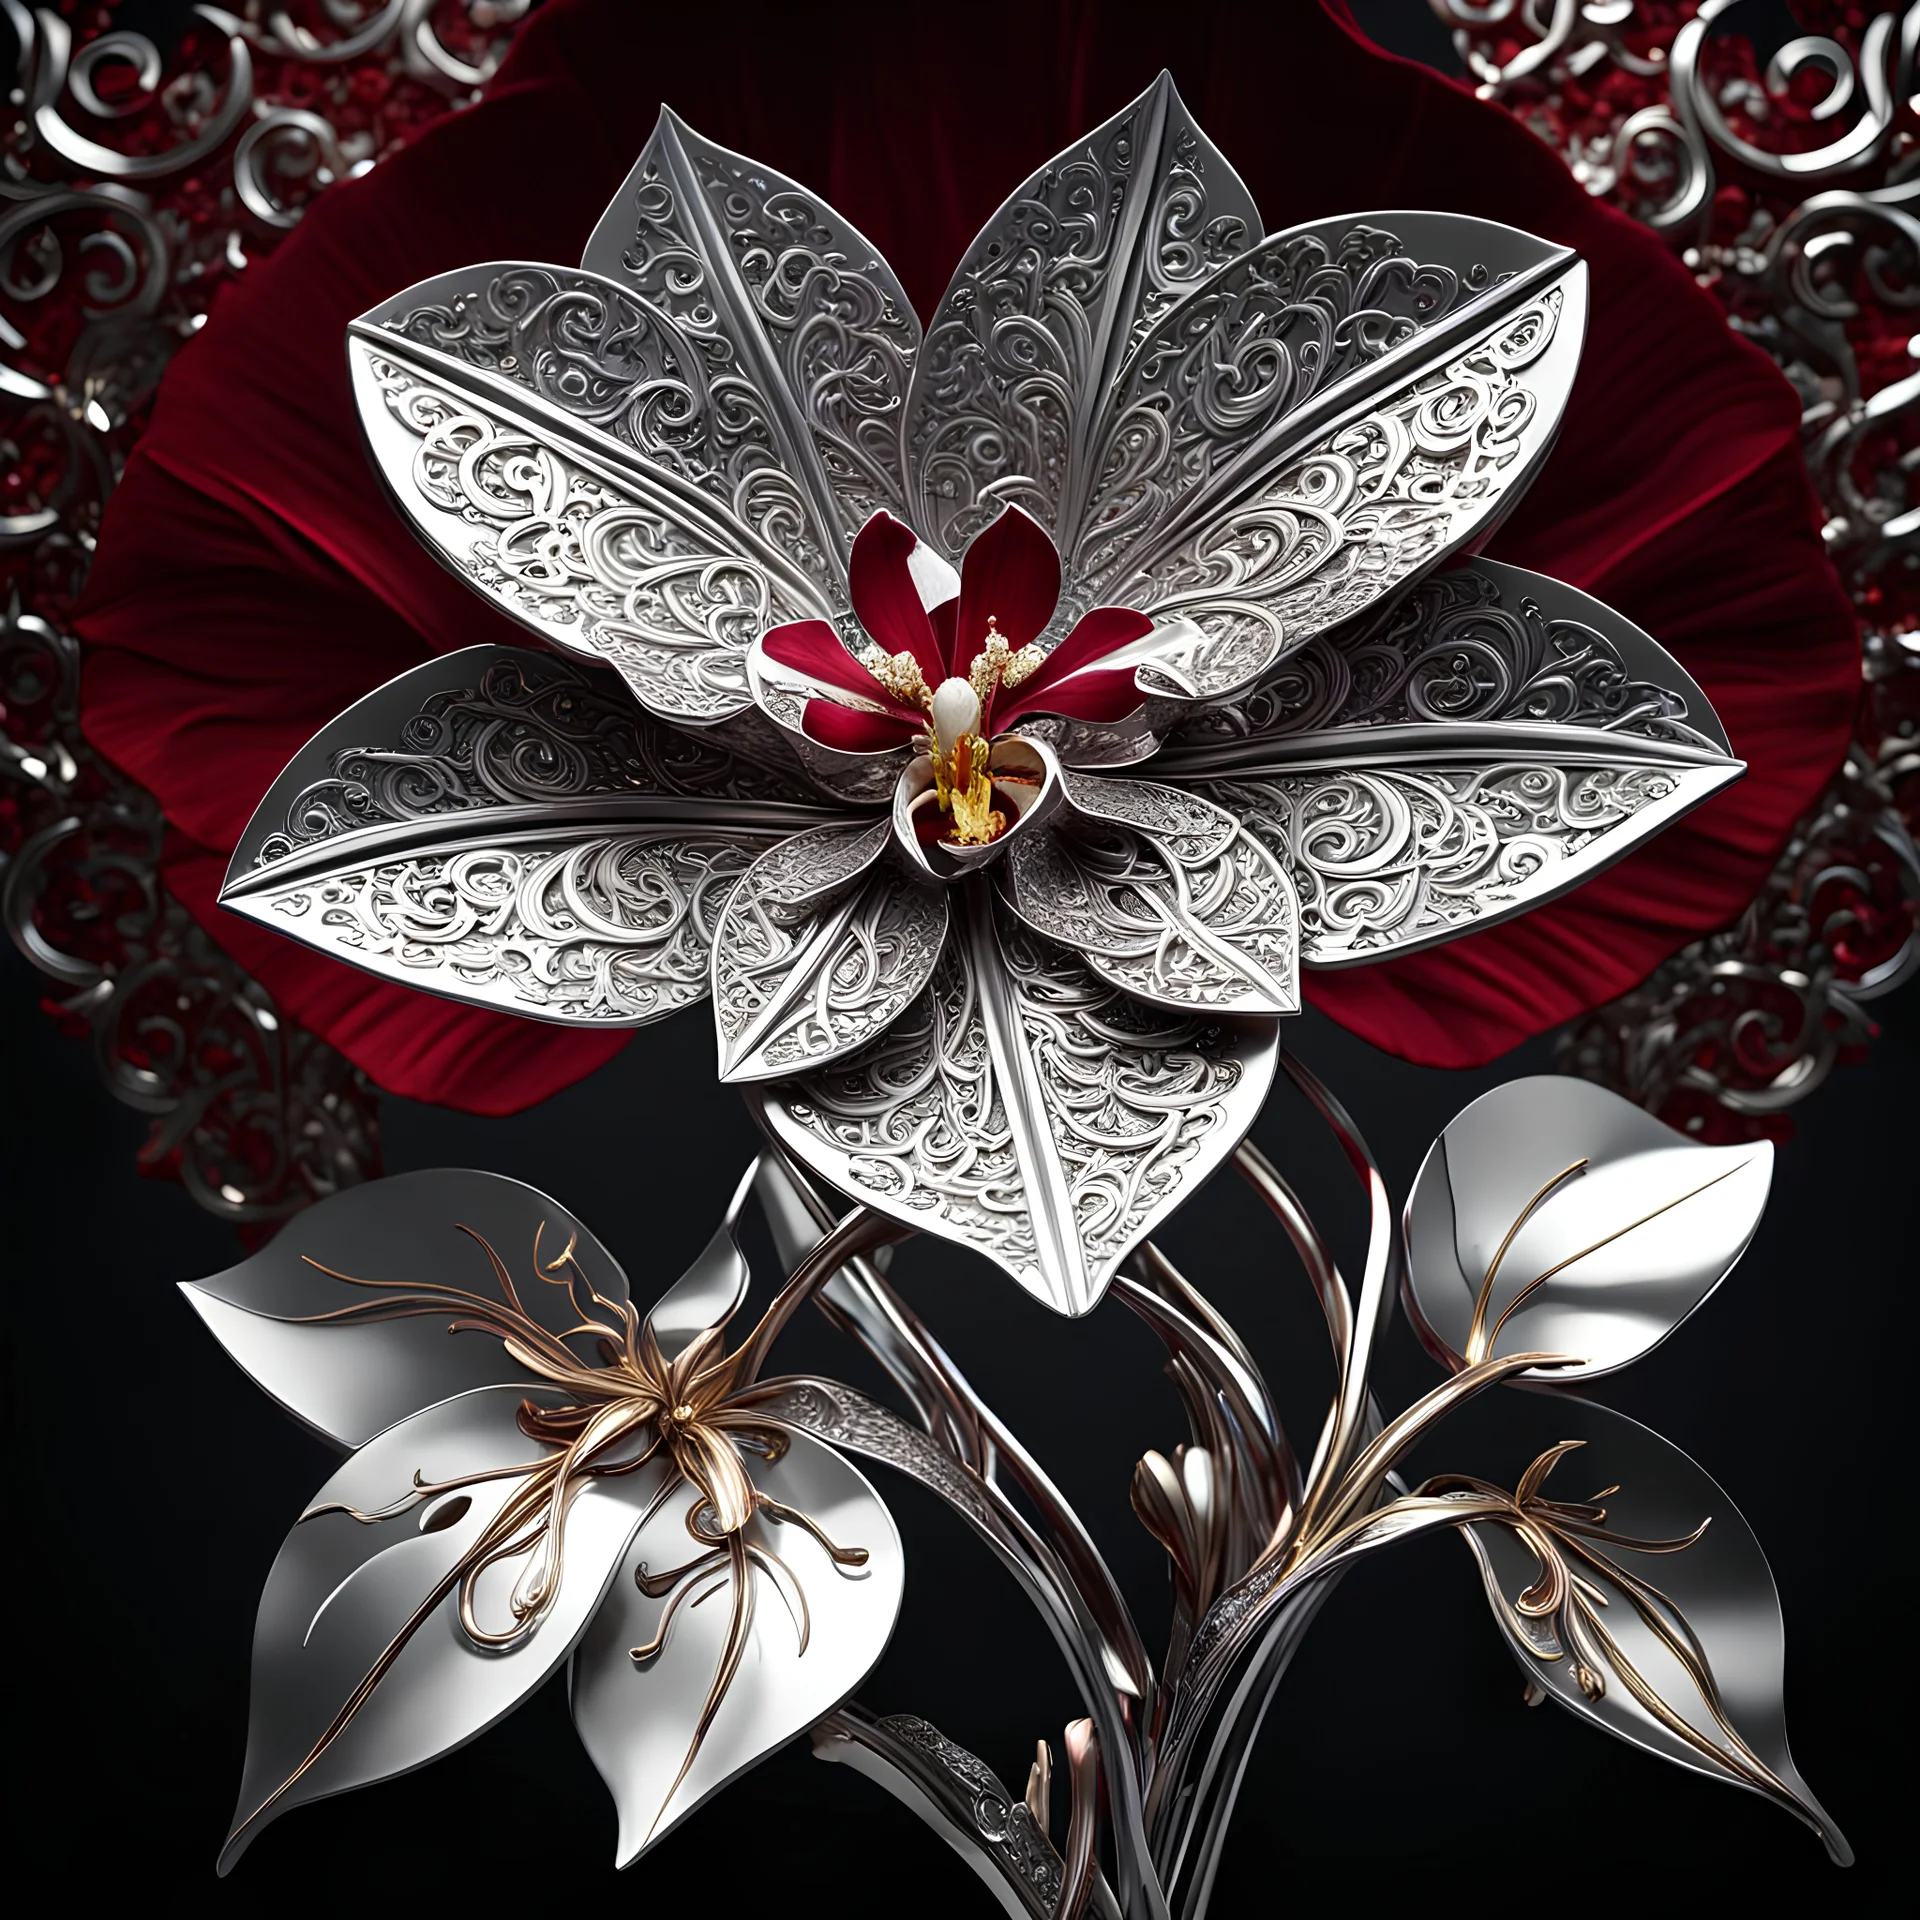 award winning photograph of a Stunning filigree METAL Orchid with reflective metal white-silver petals and platinum metal leaves, dramatic crushed dark red velvet backdrop, perfect showroom lighting, cinematic shot fitting of a jewelry magazine, dark space sky, intricate mech details, ground level shot, 64K resolution, Cinema 4D, Behance HD, polished metal, ultra maxamalism